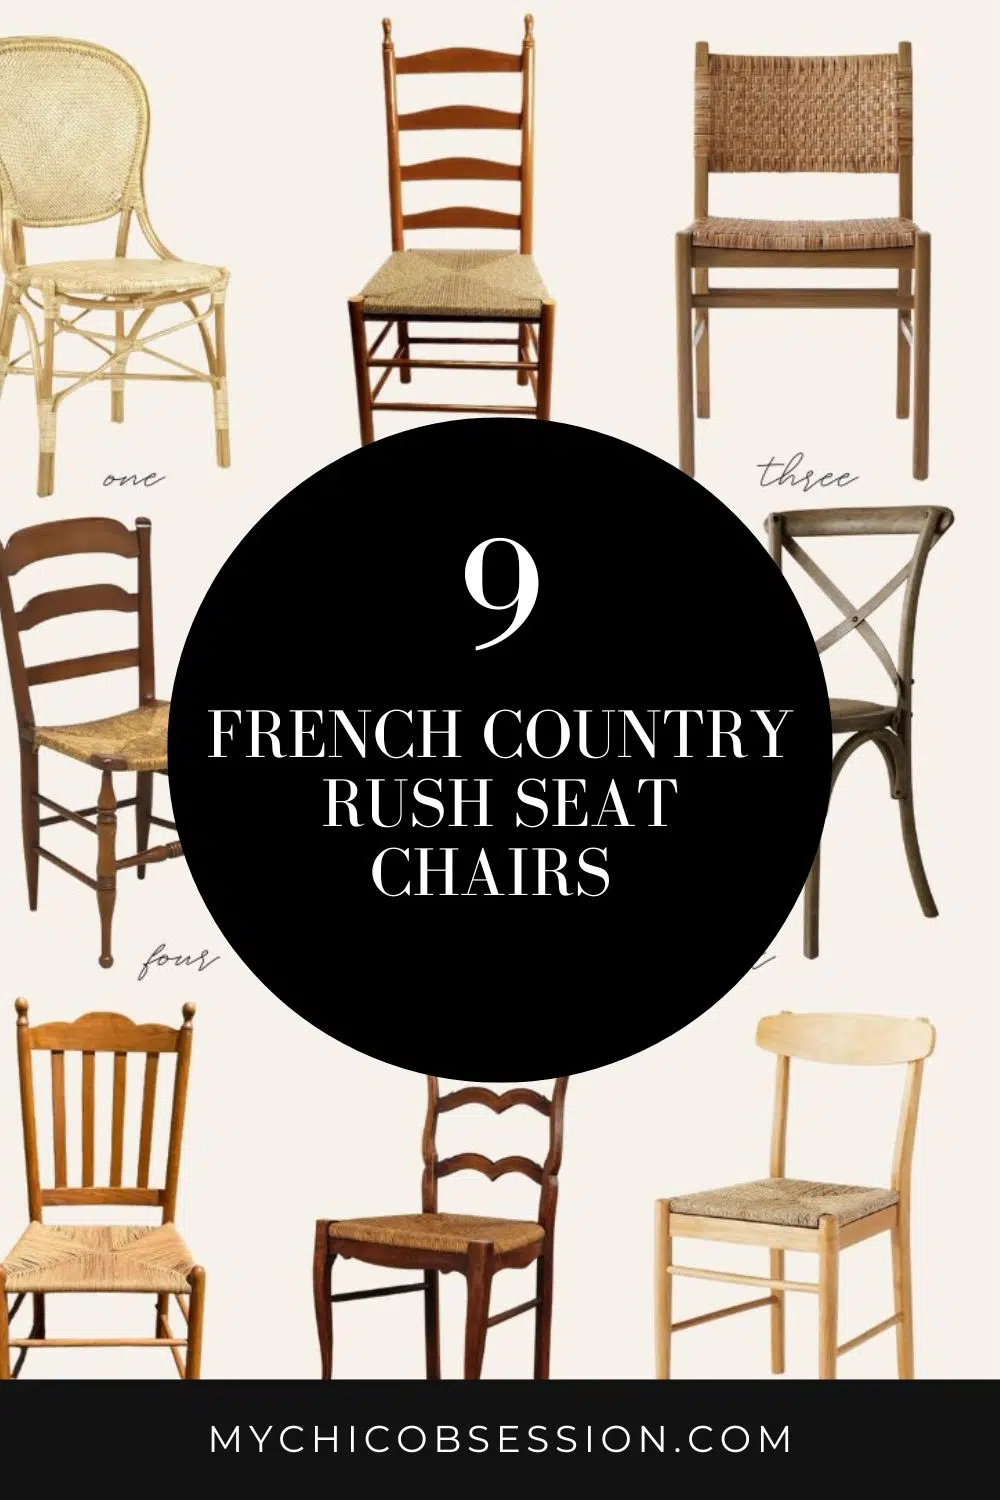 French country rush seat chairs